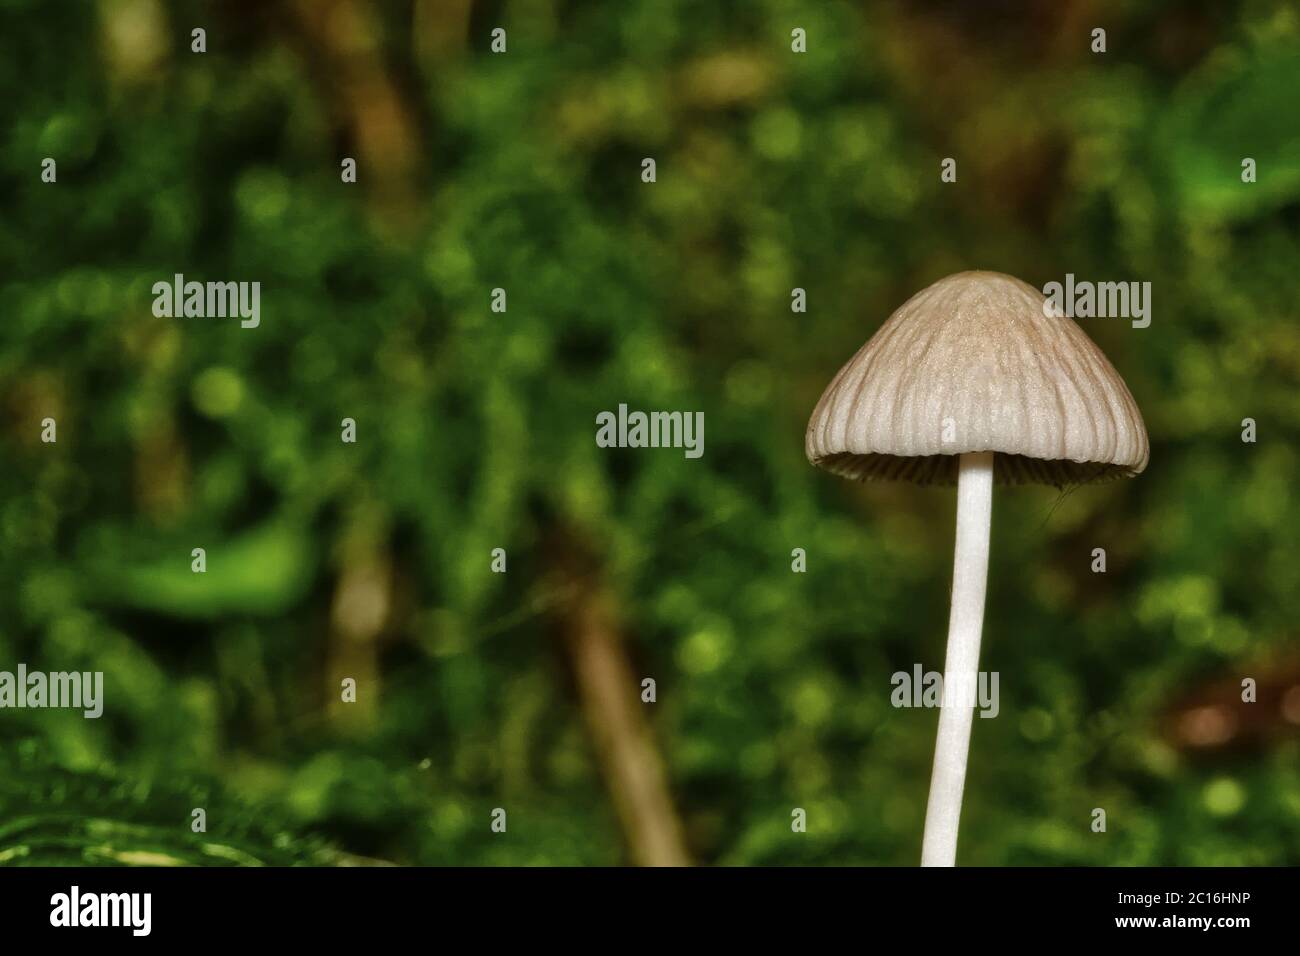 Small mushroom with blurred background Stock Photo